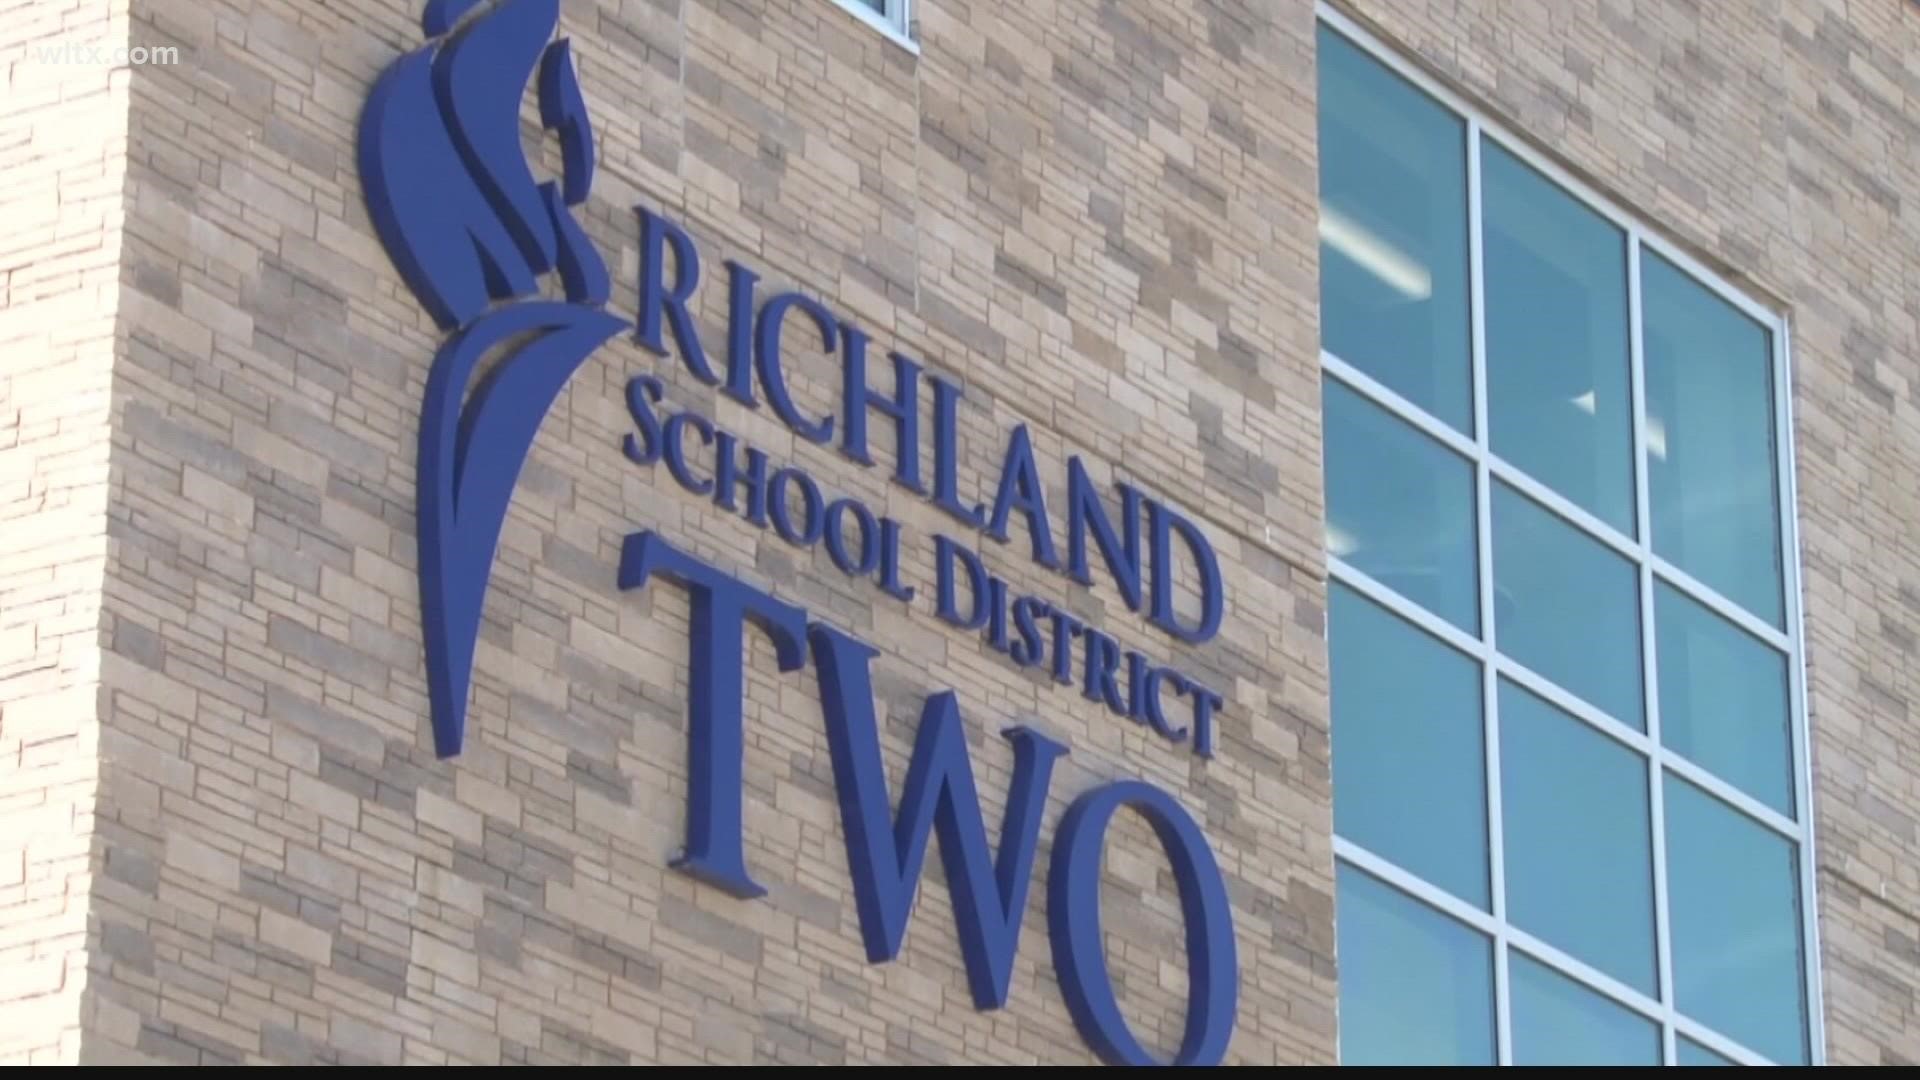 The Richland Two school board voted for more flexibility and less disciplinary action when it comes to the school dress code.